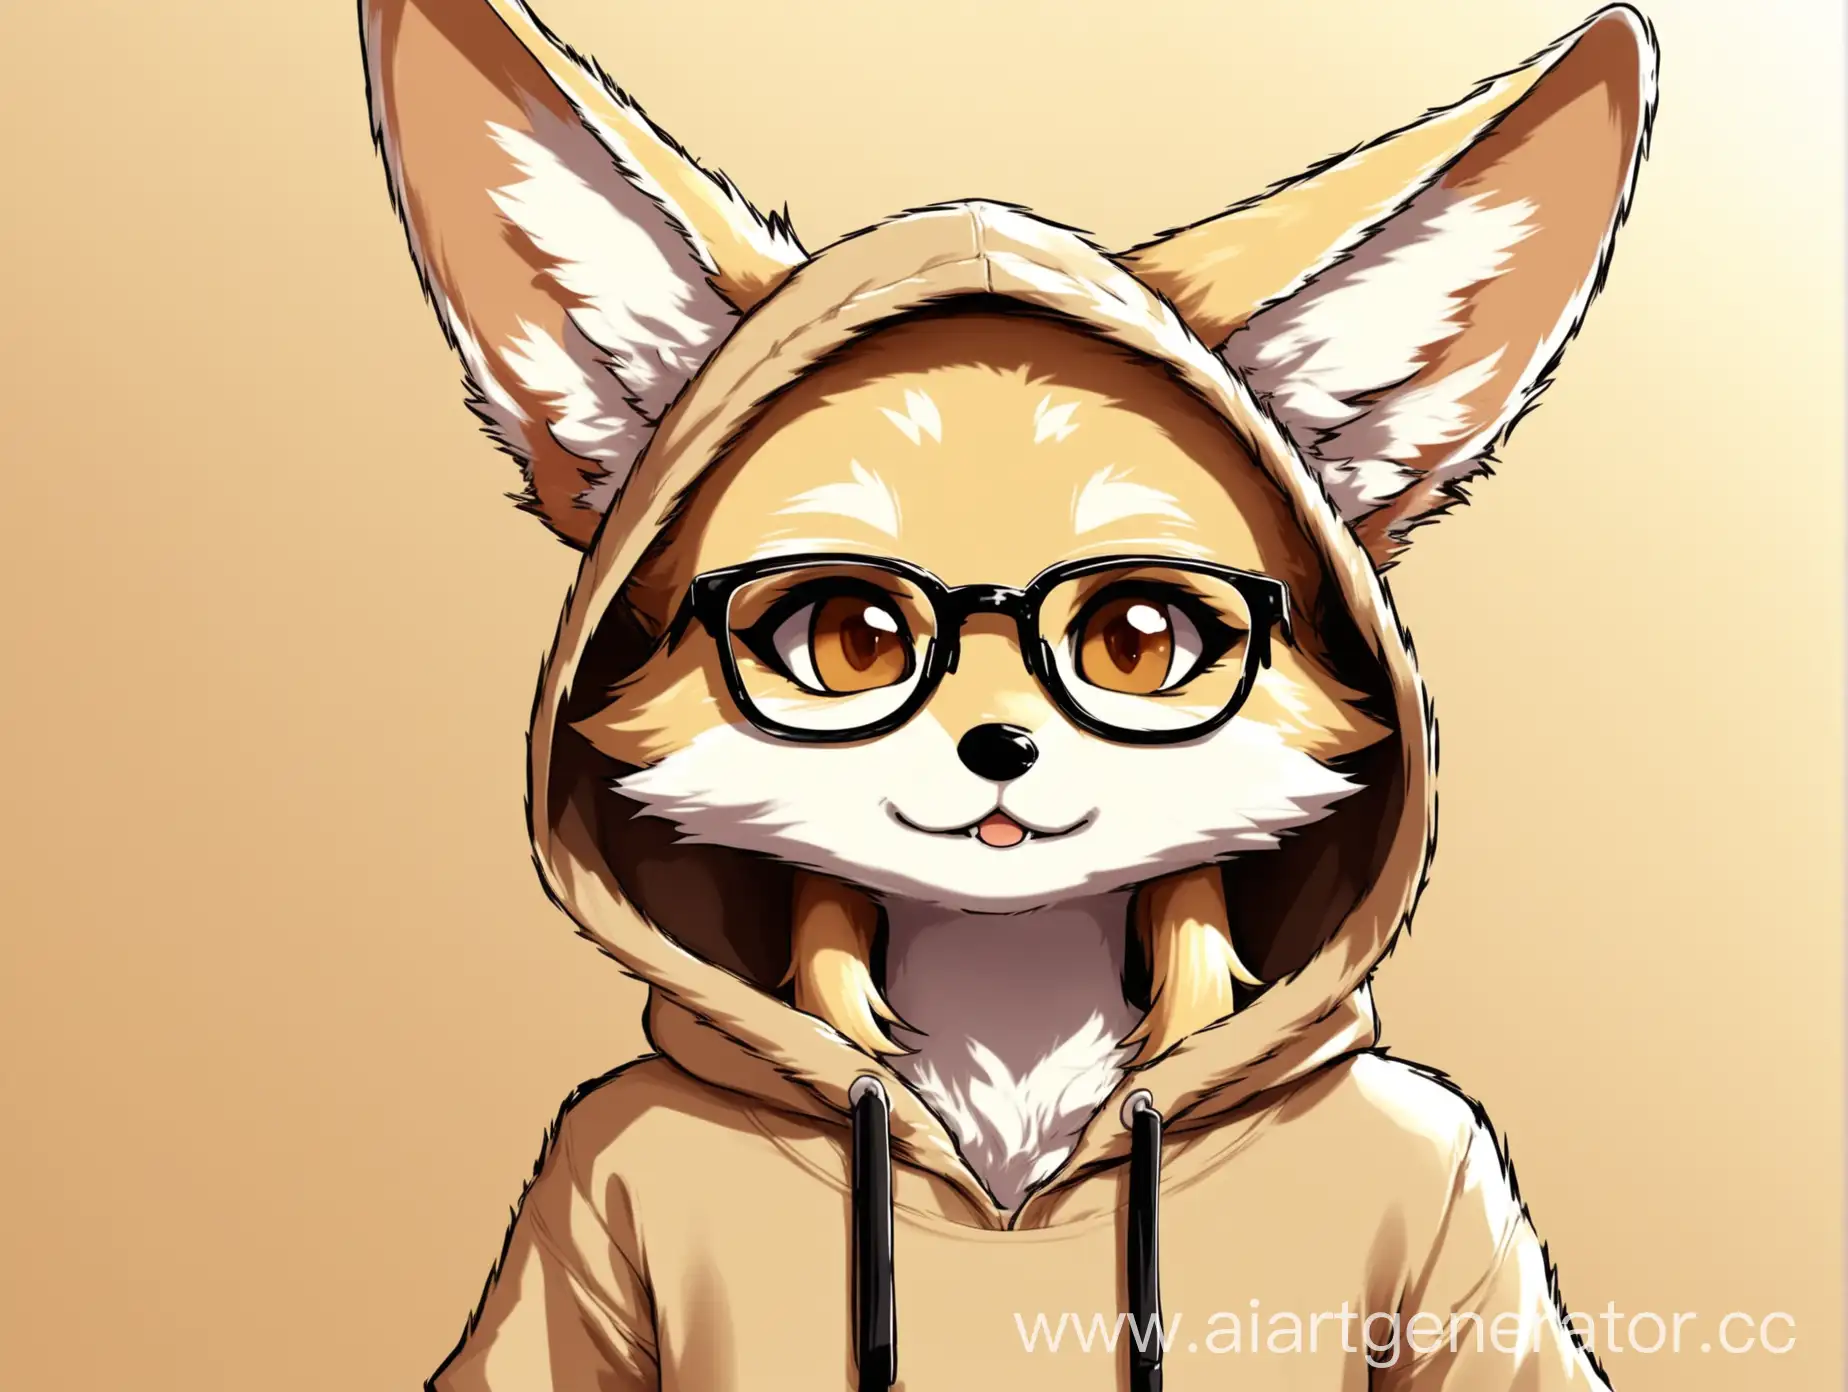 Furry-Fennec-with-Glasses-Wearing-Hoodies-and-Long-Bangs